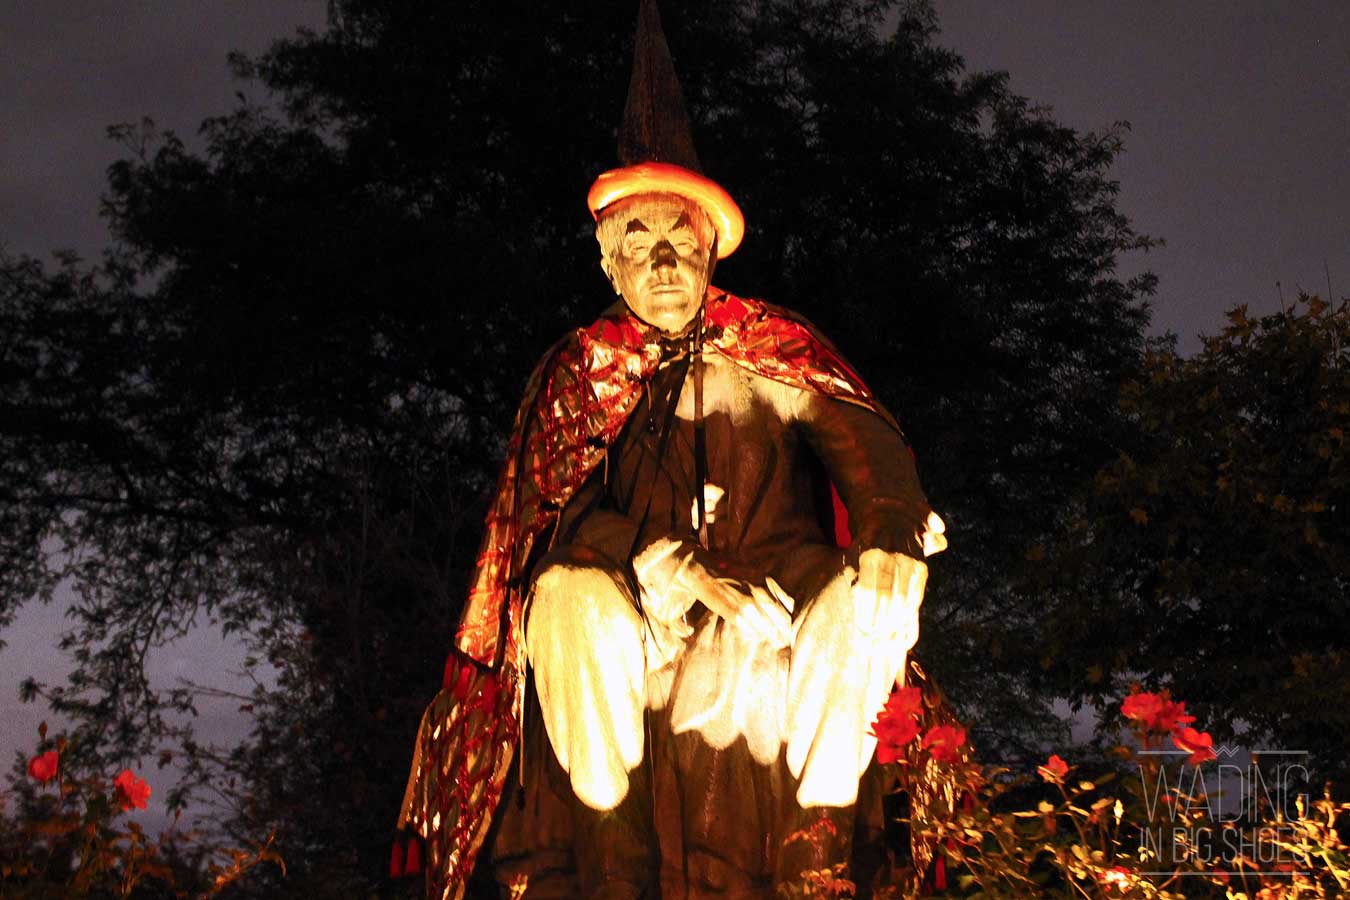 Hallowe'en in Greenfield Village: Tips To Make The Most Of Your Visit | via Wading in Big Shoes